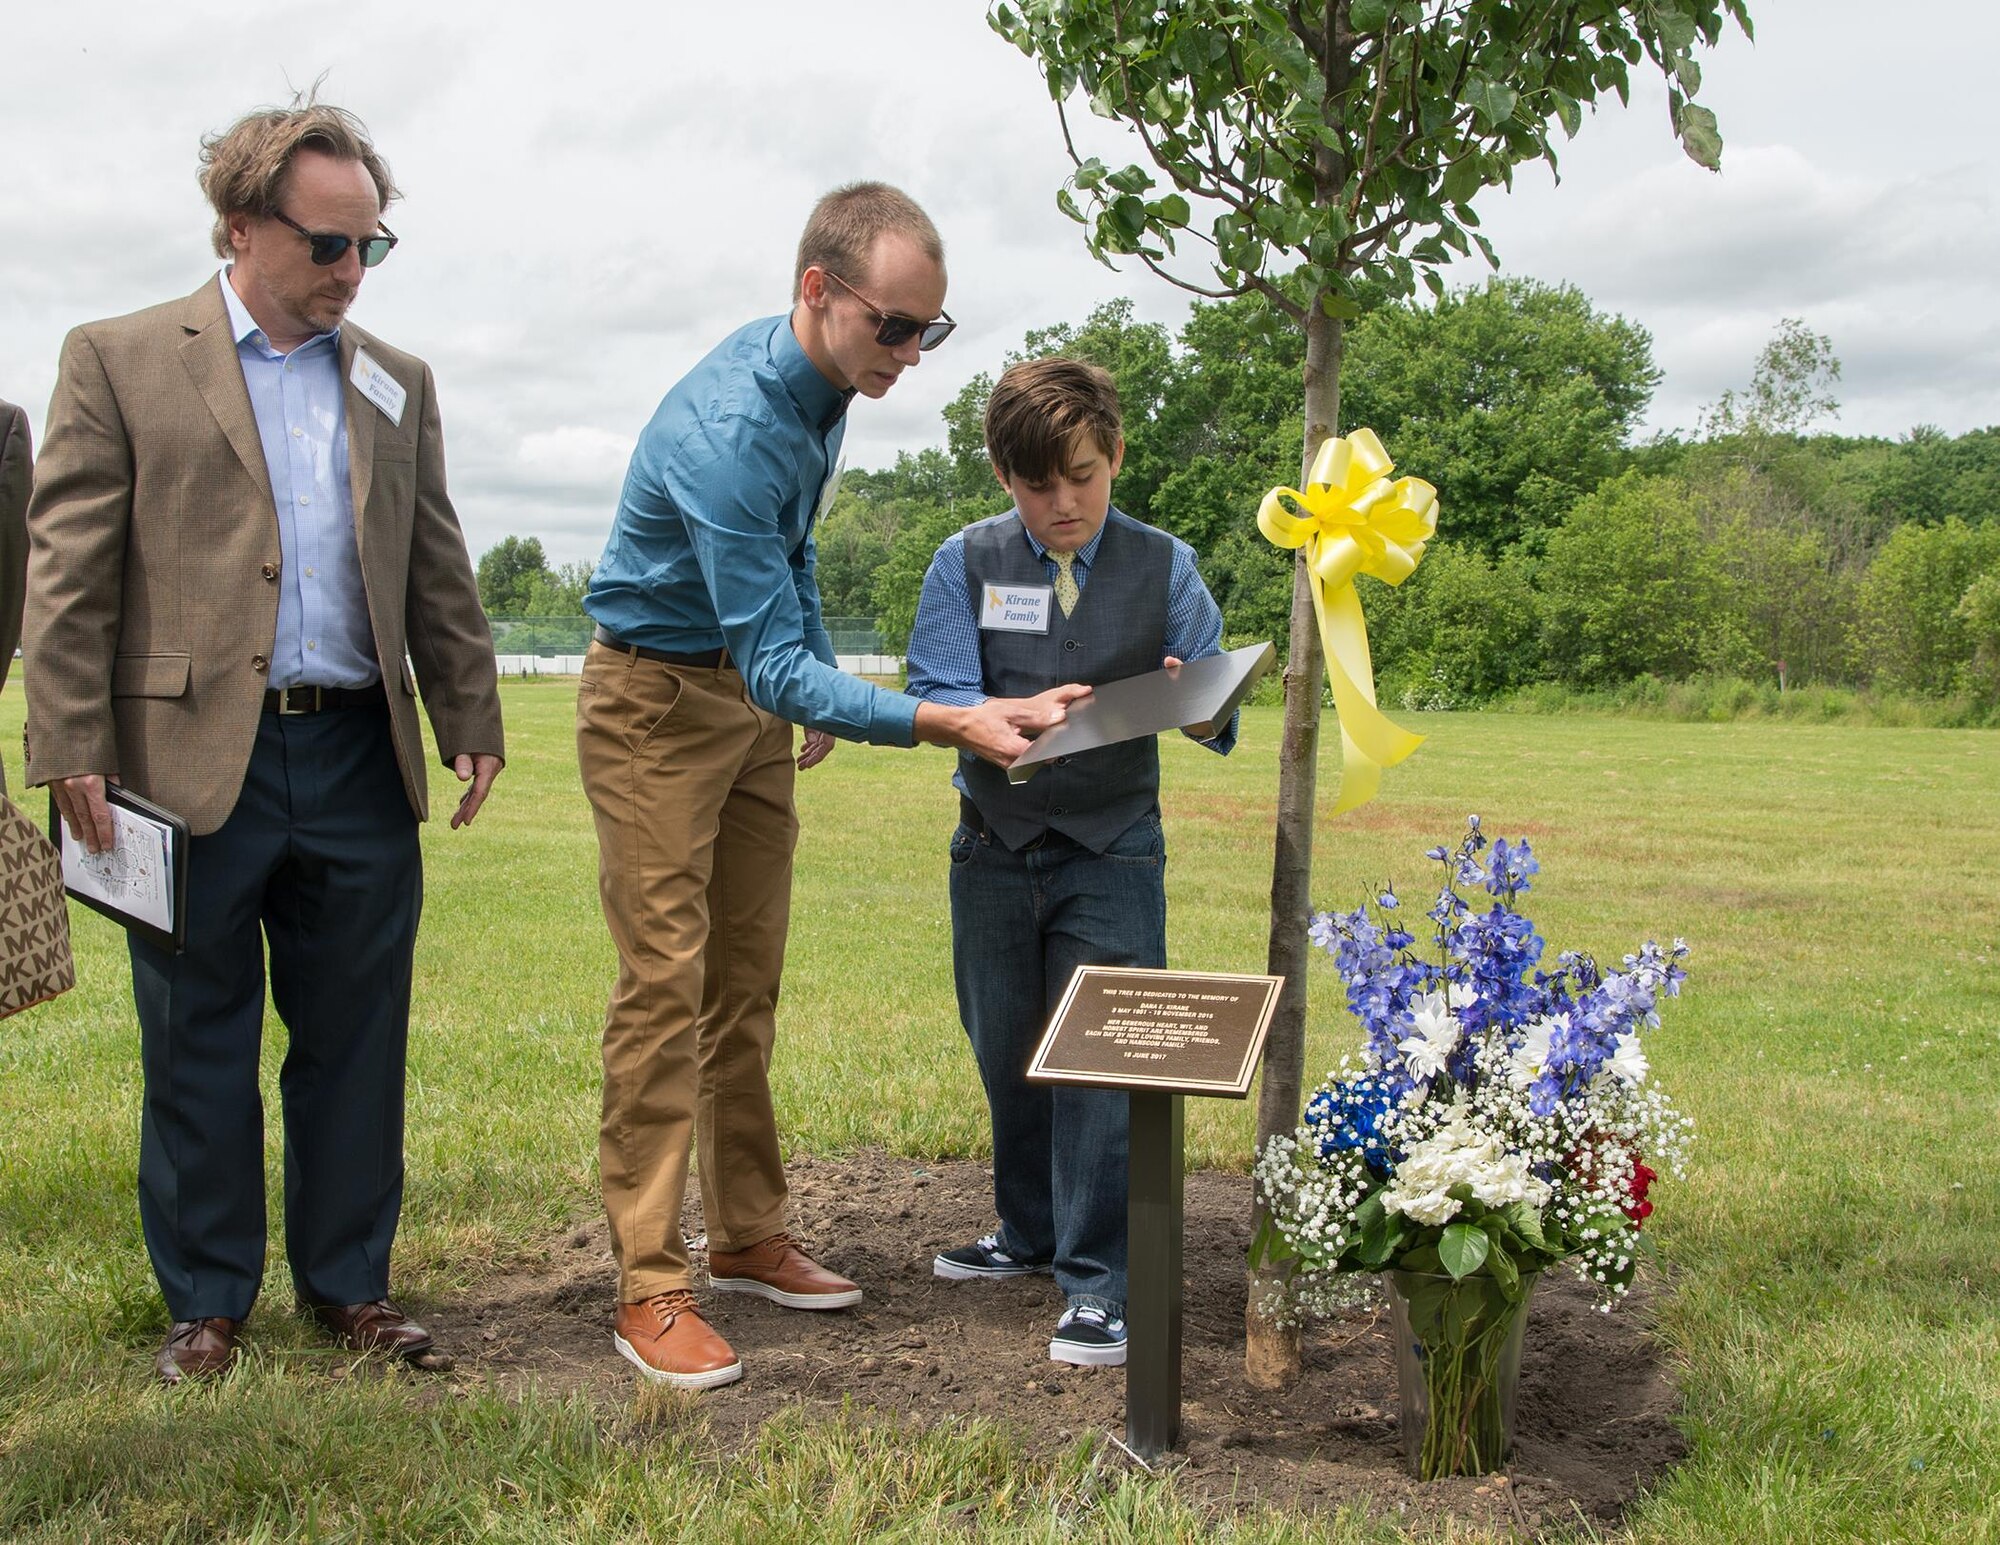 Joe Kirane look on as his children, Dylen and Ian, unveil a plaque in front of a tree dedicated to his mother, Dana E. Kirane, during a Memorial Park Dedication Ceremony at Hanscom Air Force Base, Mass., June 16. Kirane worked at Hanscom from 1974 until her retirement in 2006 as a financial services officer. Also honored during the event were Dennis “Dennie” Guthrie and retired Tech. Sgt. John A. Raynes. (U.S. Air Force photo by Jerry Saslav)